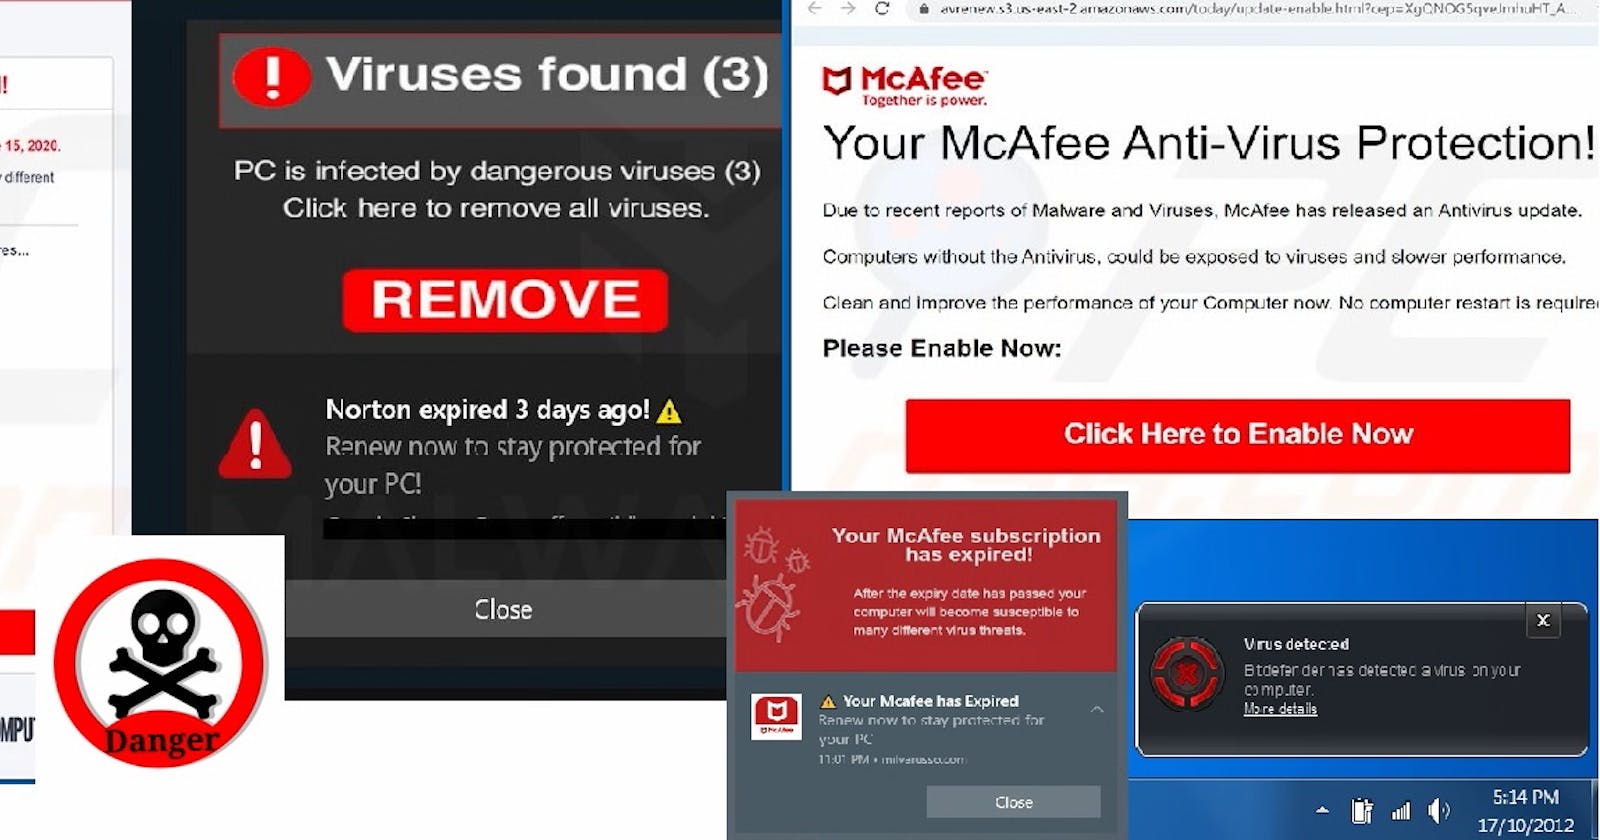 Your McAfee Subscription Has Expired